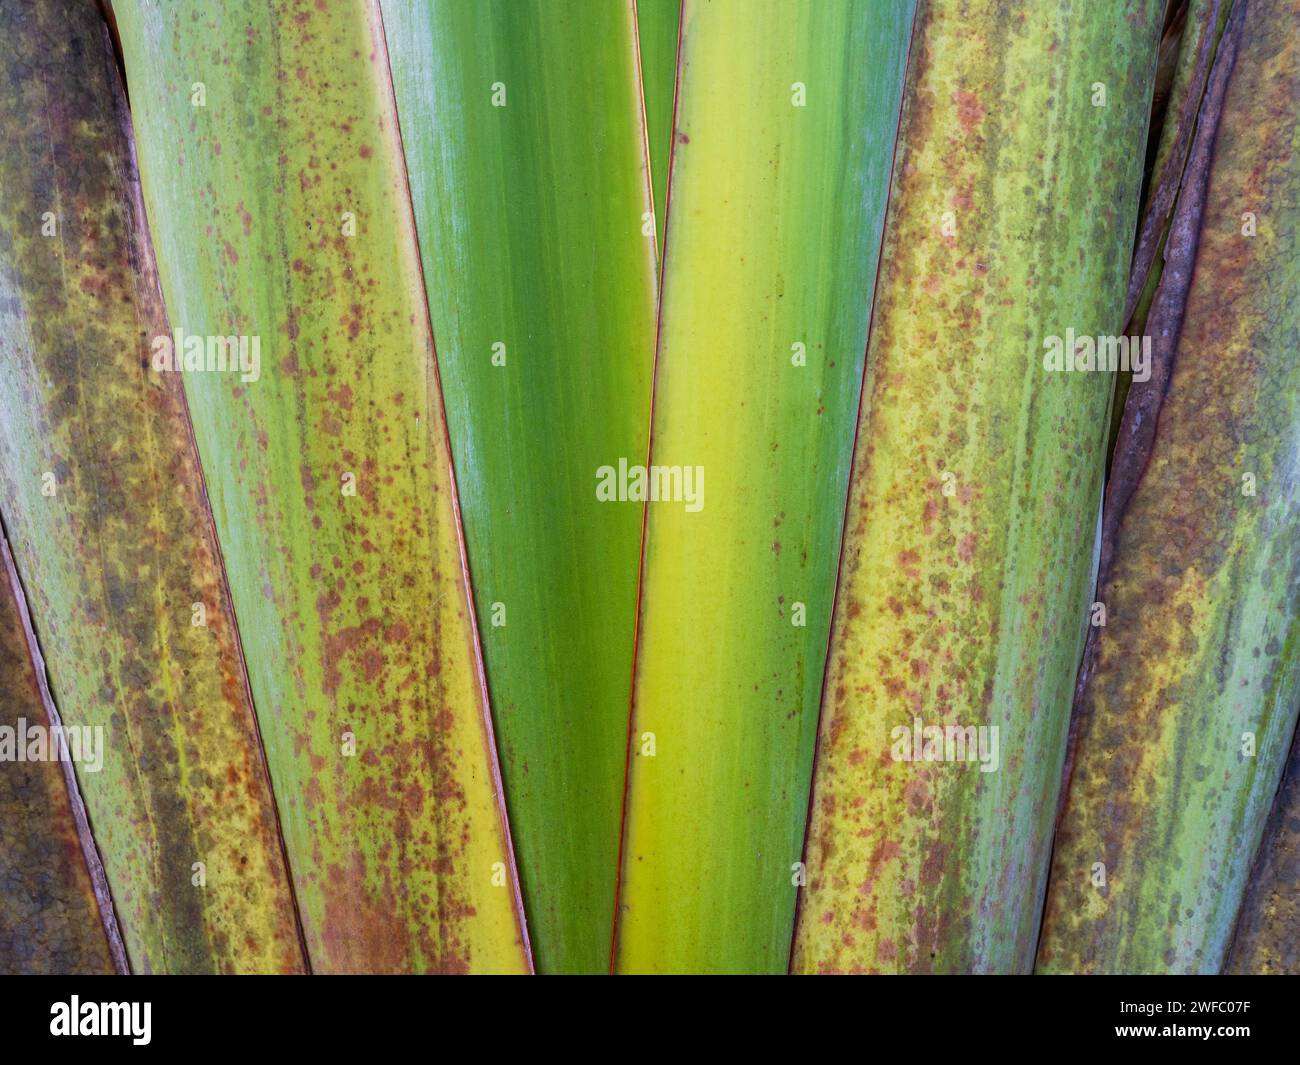 Detail closeup view of traveller's palm tree aka ravenala madagascariensis - a colorful and textured abstract natural background Stock Photo